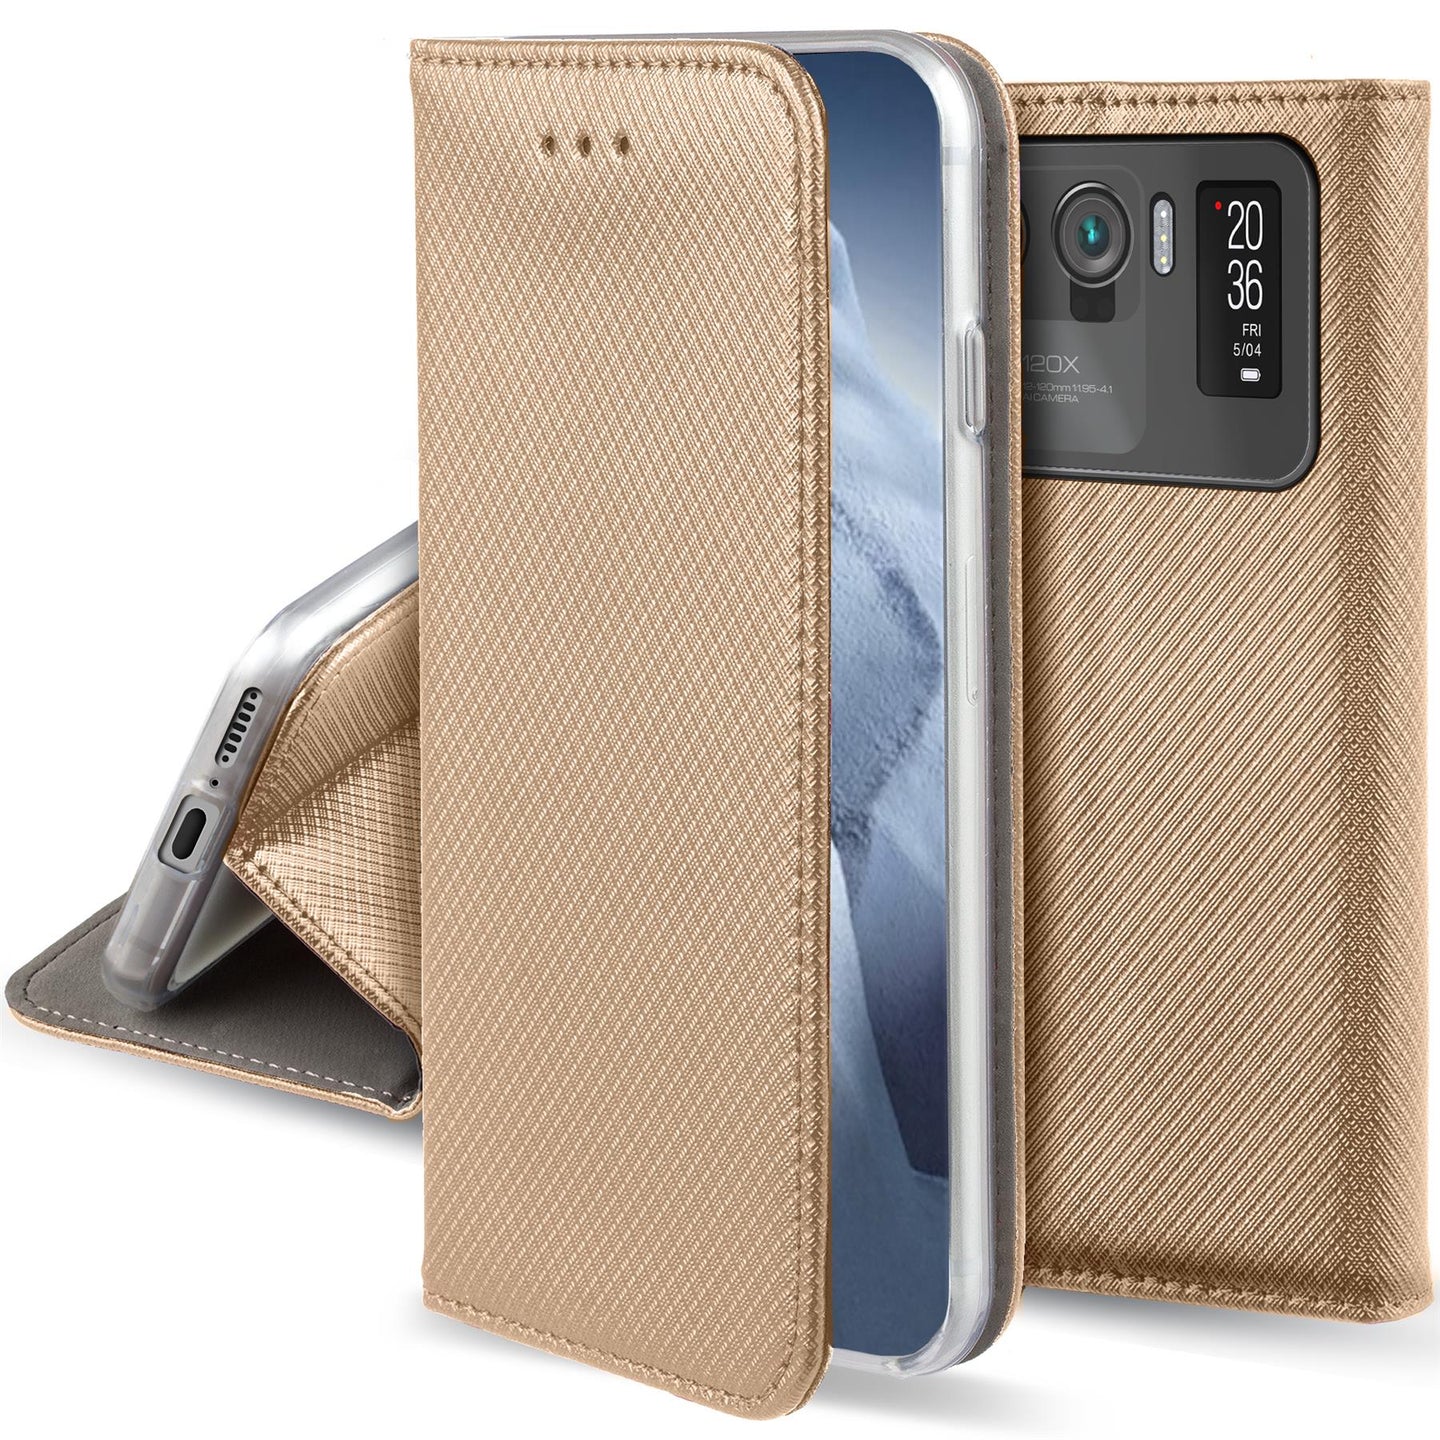 Moozy Case Flip Cover for Xiaomi Mi 11 Ultra, Gold - Smart Magnetic Flip Case Flip Folio Wallet Case with Card Holder and Stand, Credit Card Slots